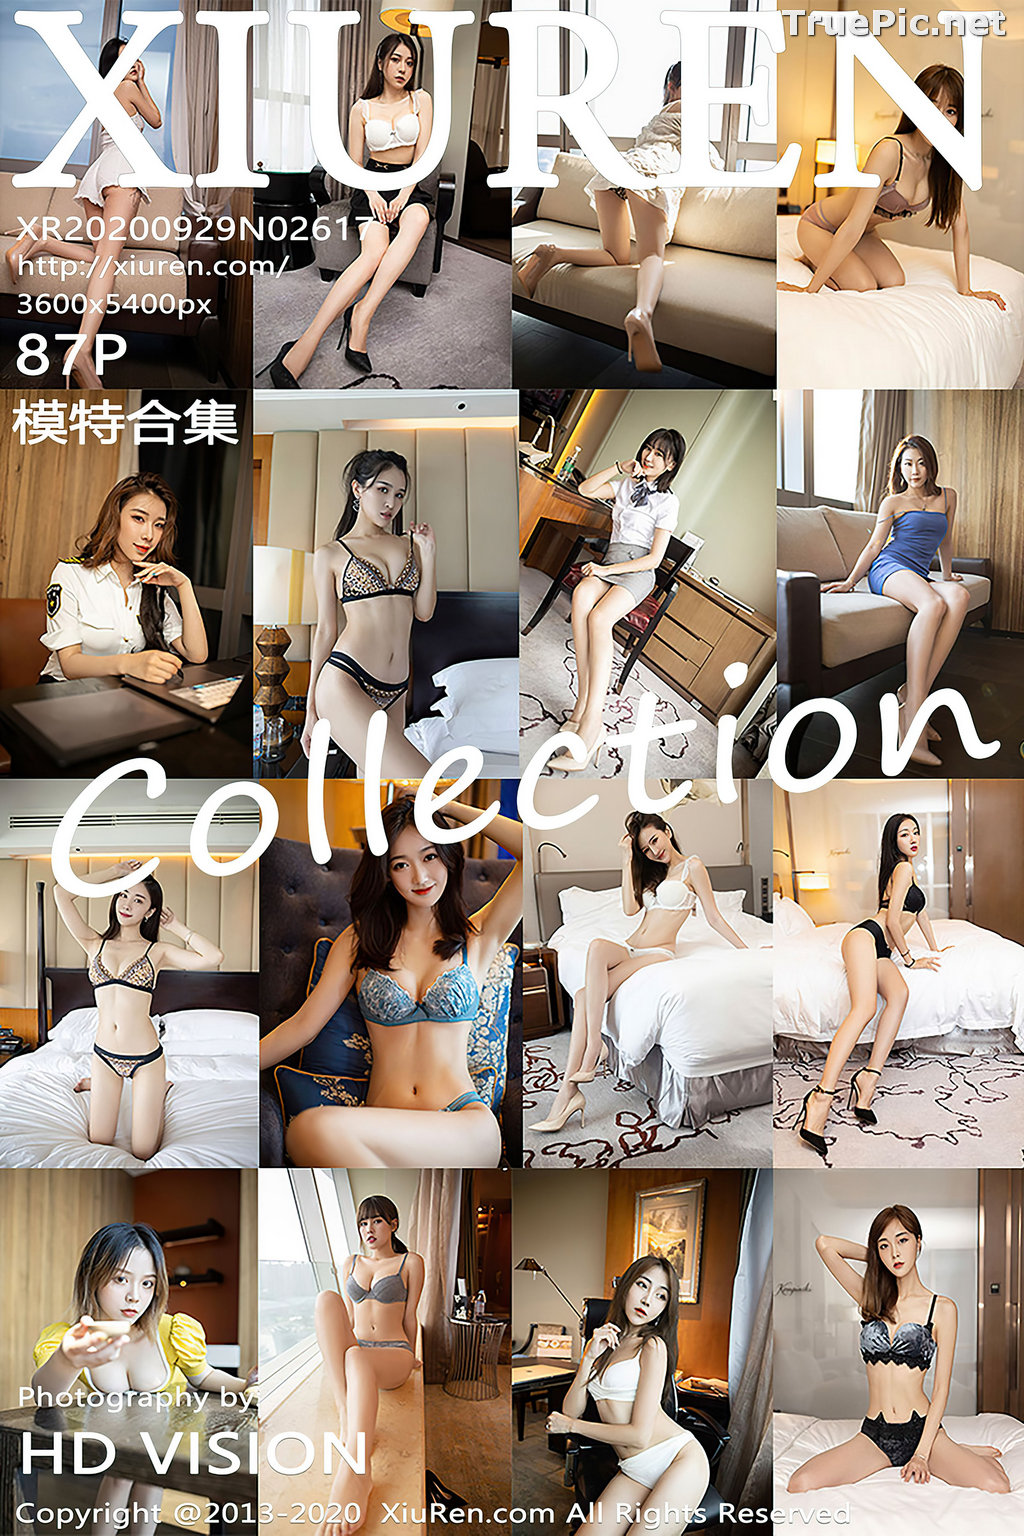 Image XIUREN No.2617 - Various Chinese Models - HD Vision Collection - TruePic.net - Picture-88